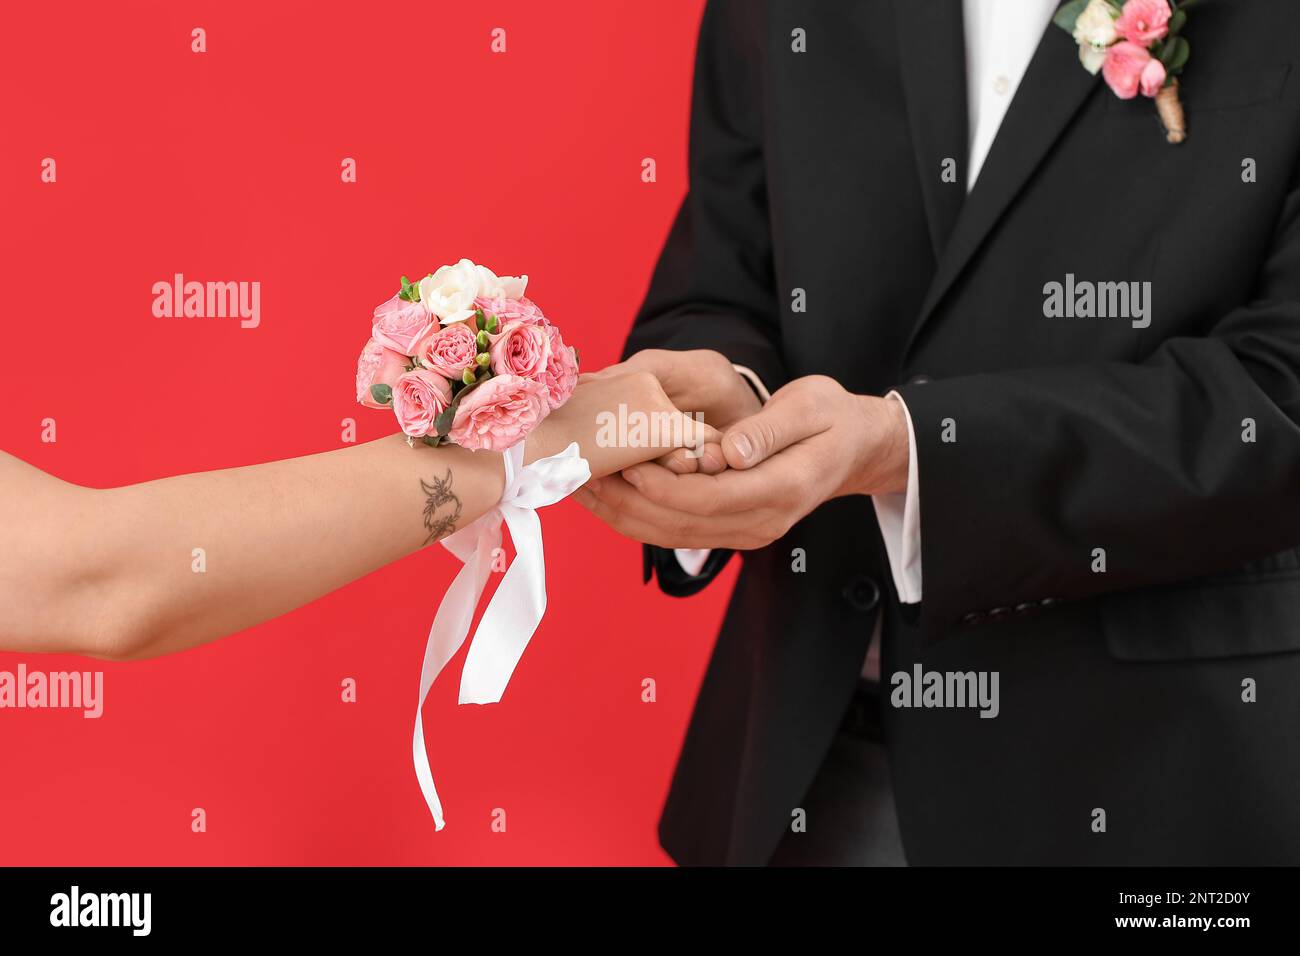 Boy Man GIVING CORSAGE Girl Teen Prom Co, Stock Video